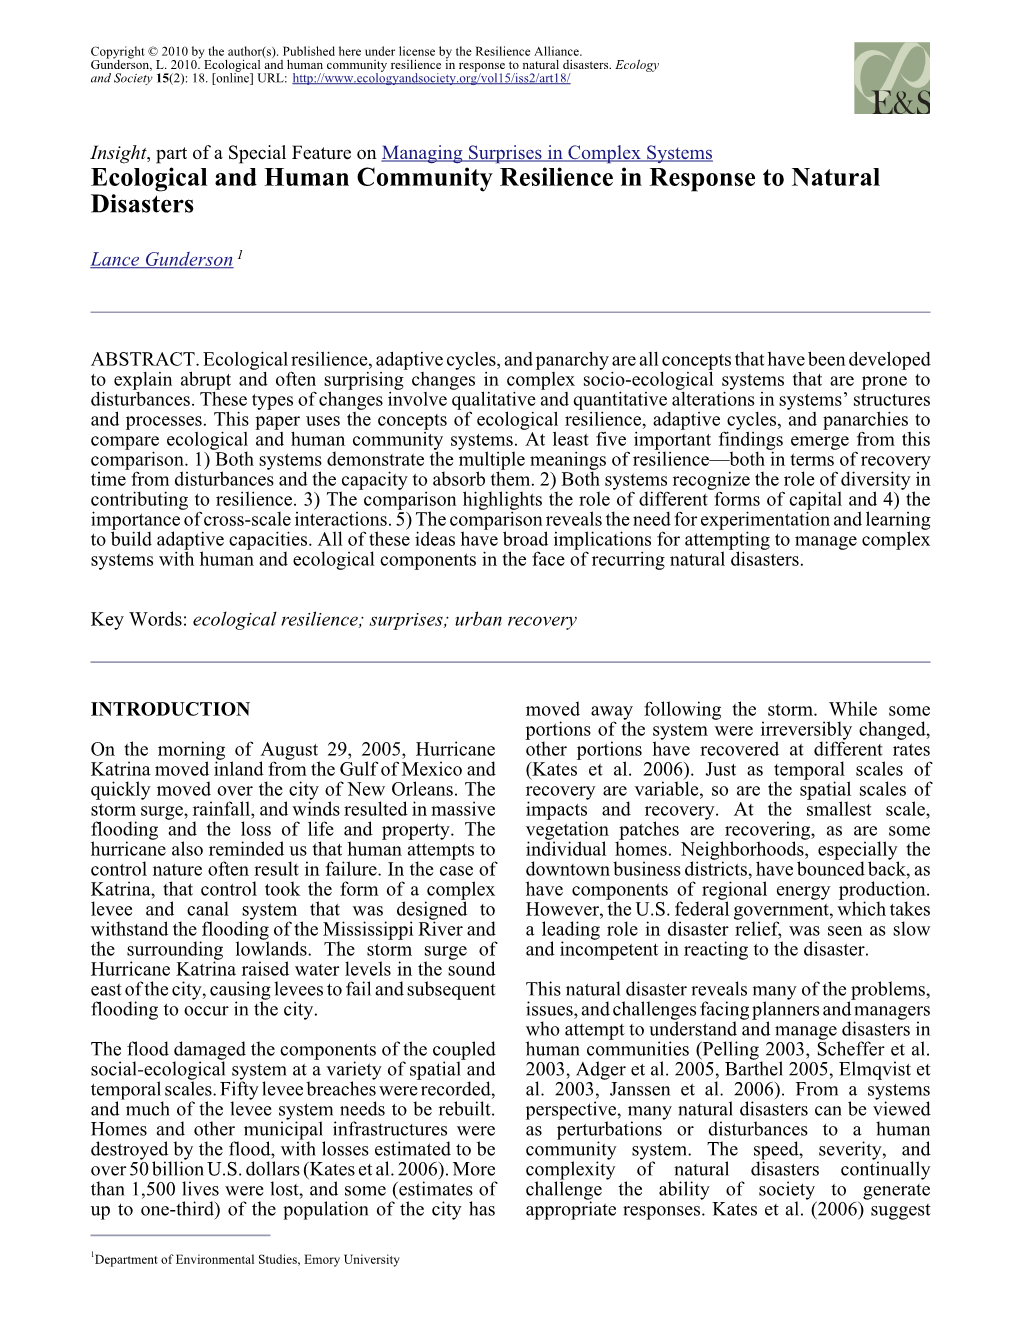 Ecological and Human Community Resilience in Response to Natural Disasters